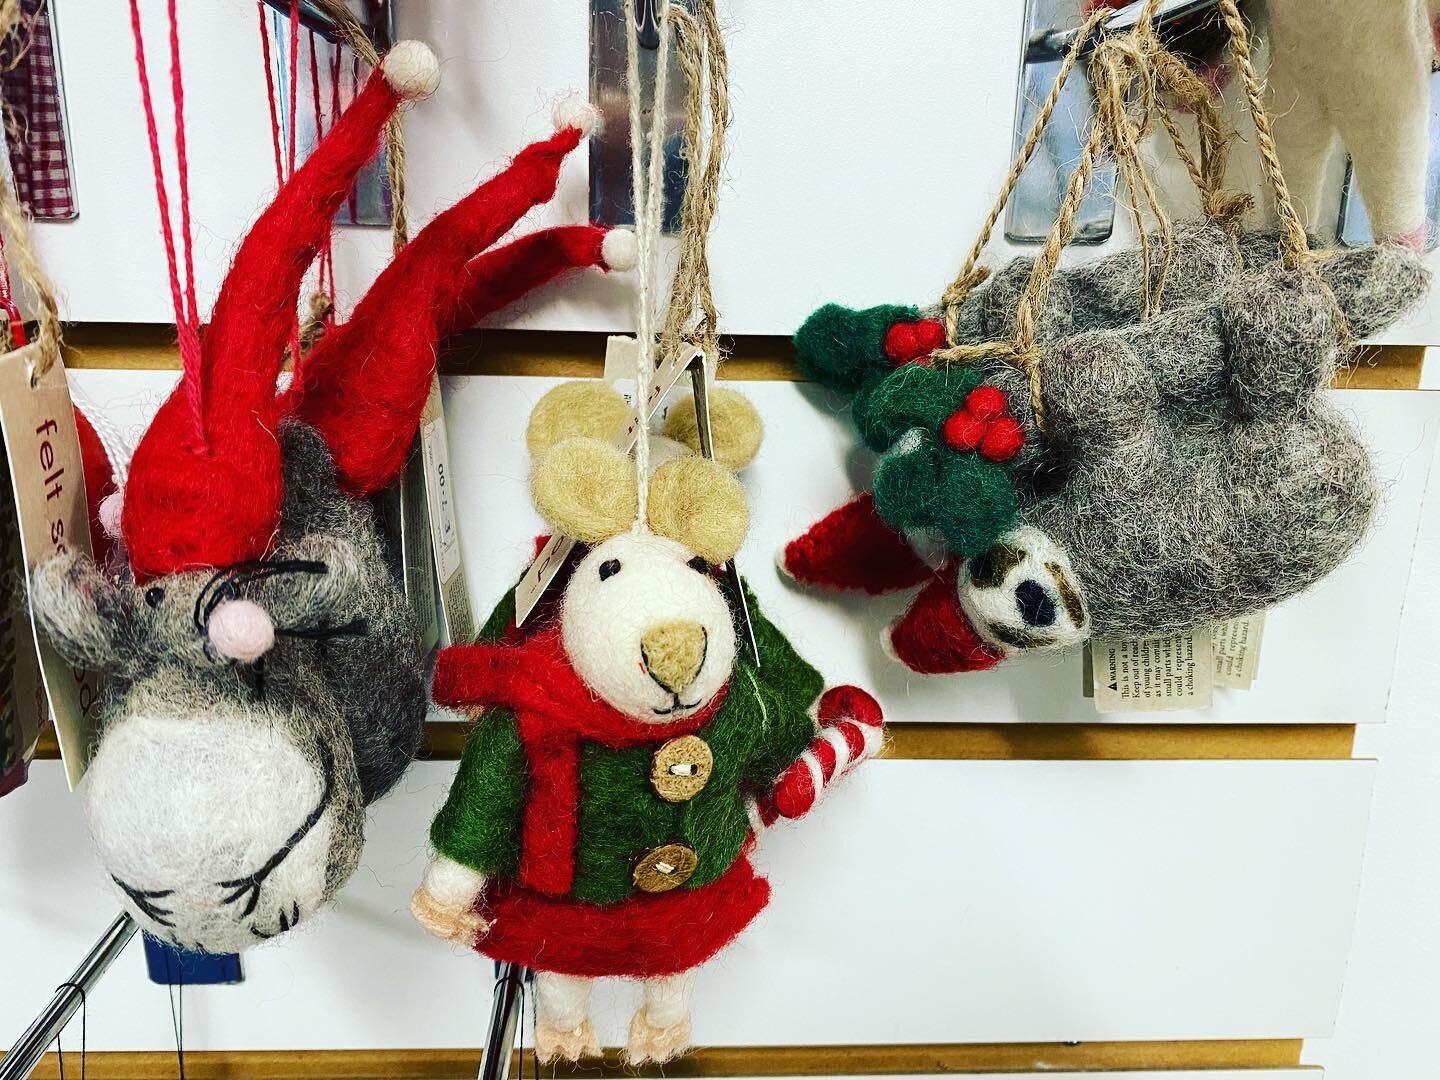 Just a few of our felt Christmas decorations fairly traded from Nepal. #fairtradechristmasgifts #christmasdecorations #feltdecorations #nepalfelt #fairtrade